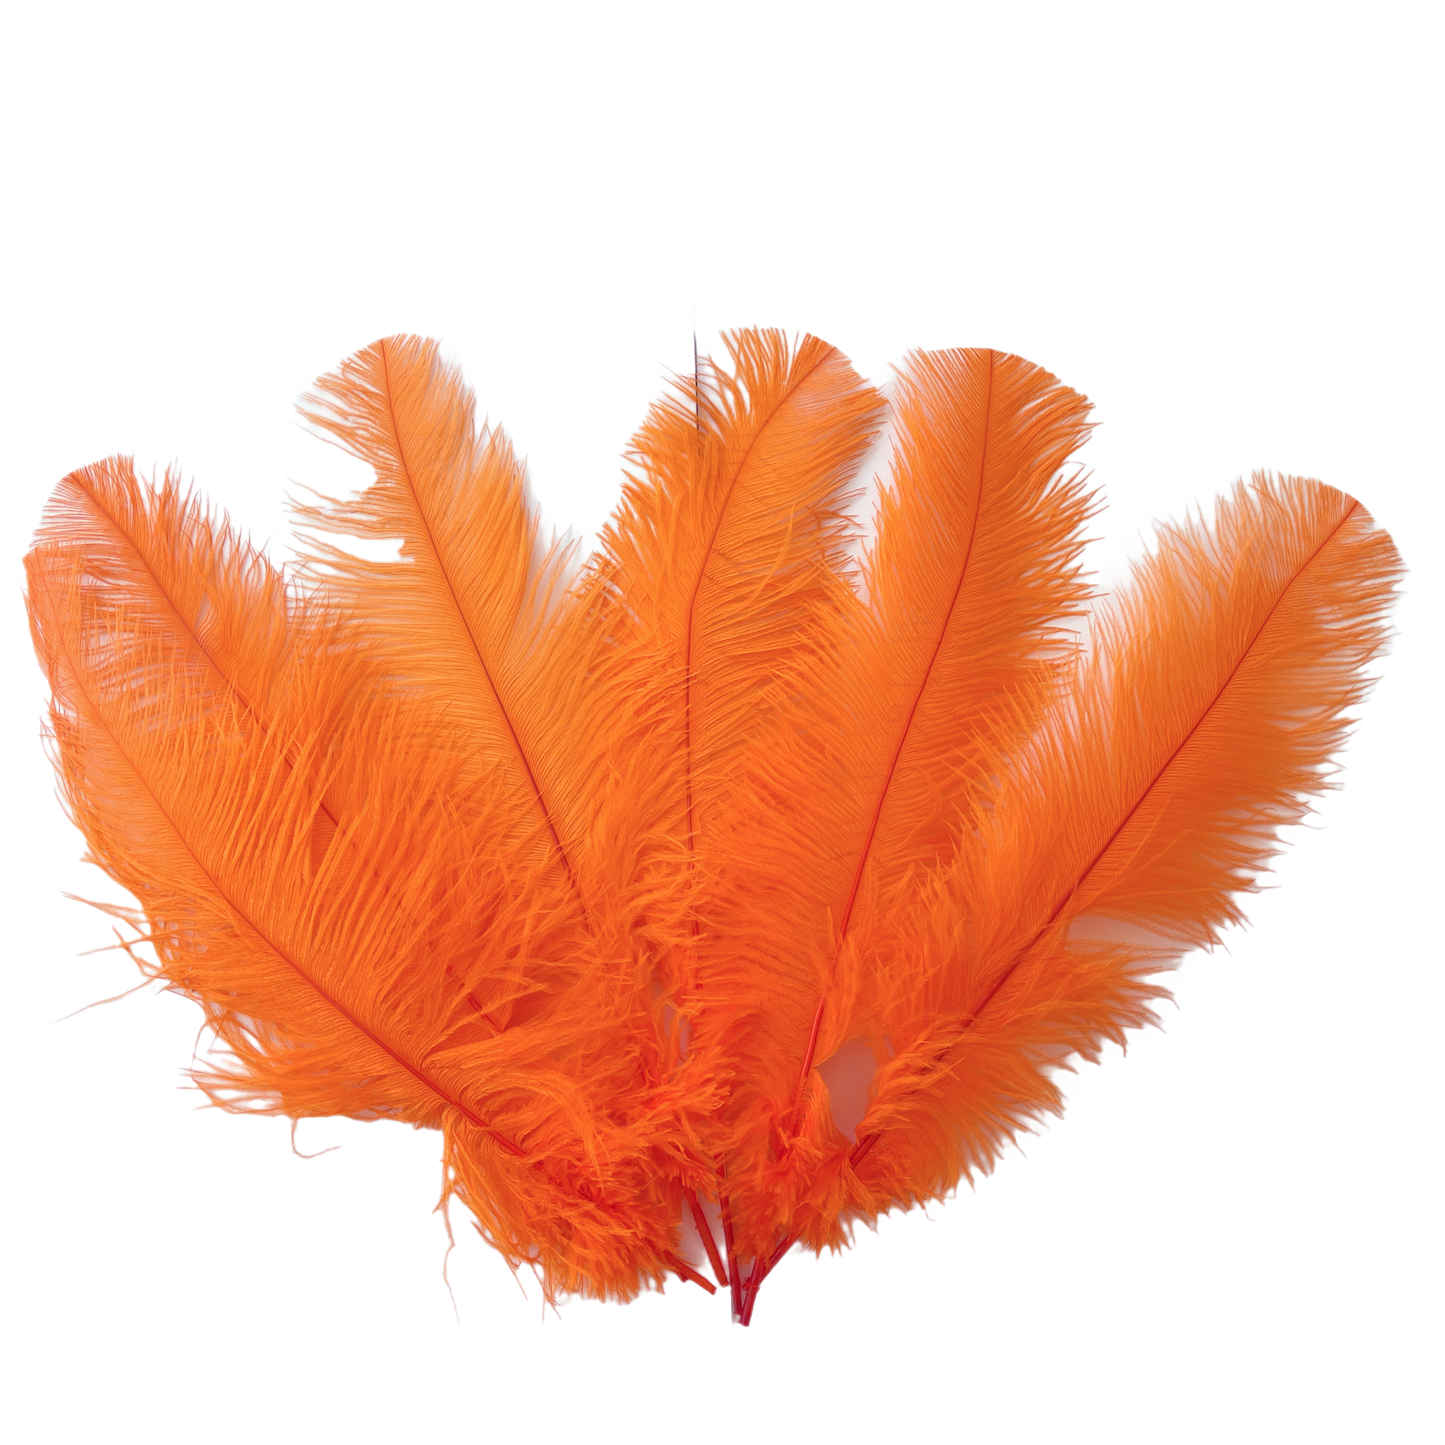 Ostrich Feather Tail Plumes 15-18" (Orange) - Buy Ostrich Feathers